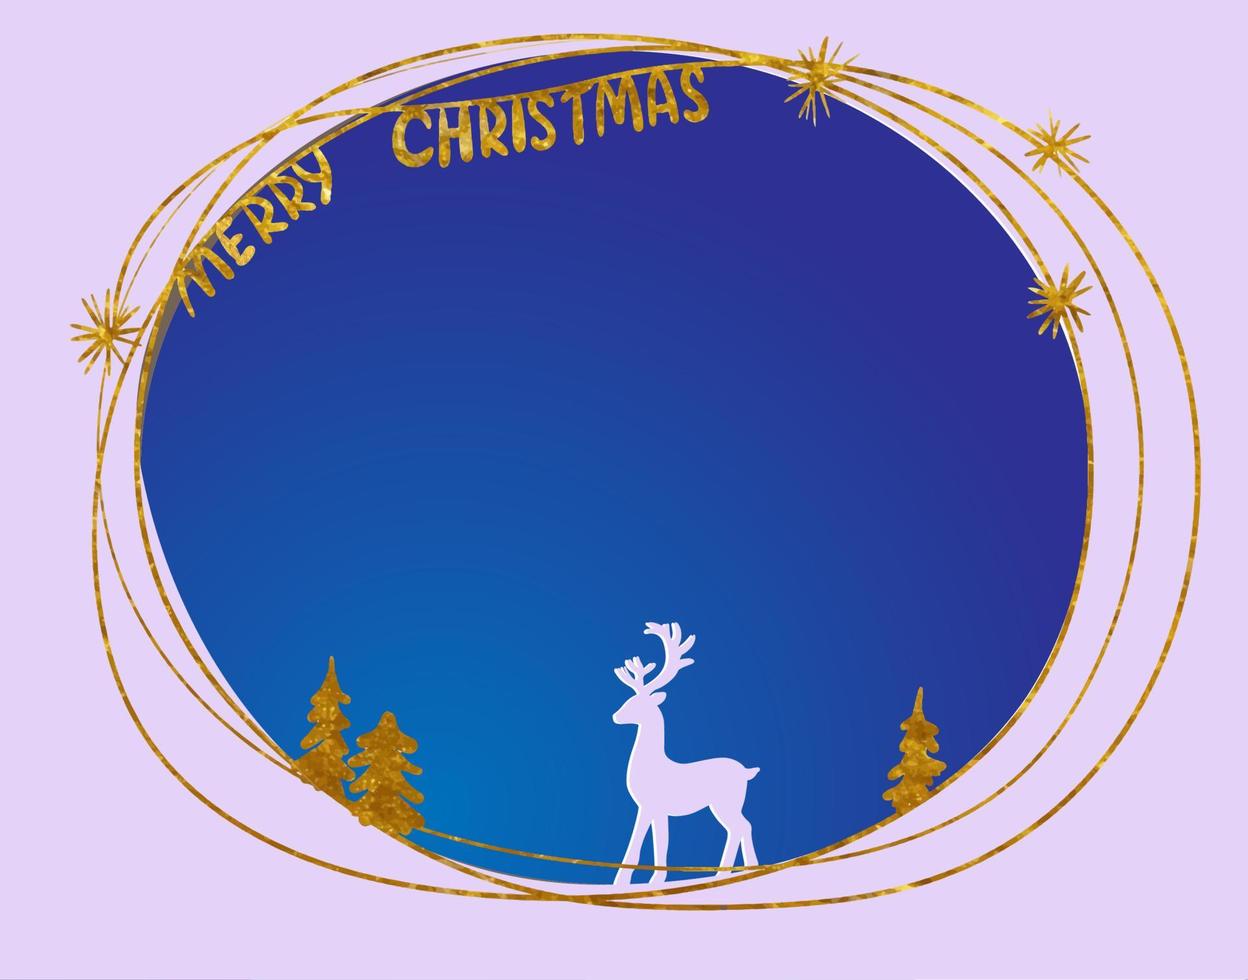 Merry Christmas banner with gold stars deer and forest. 3d paper art and digital craft style on blue night background. vector